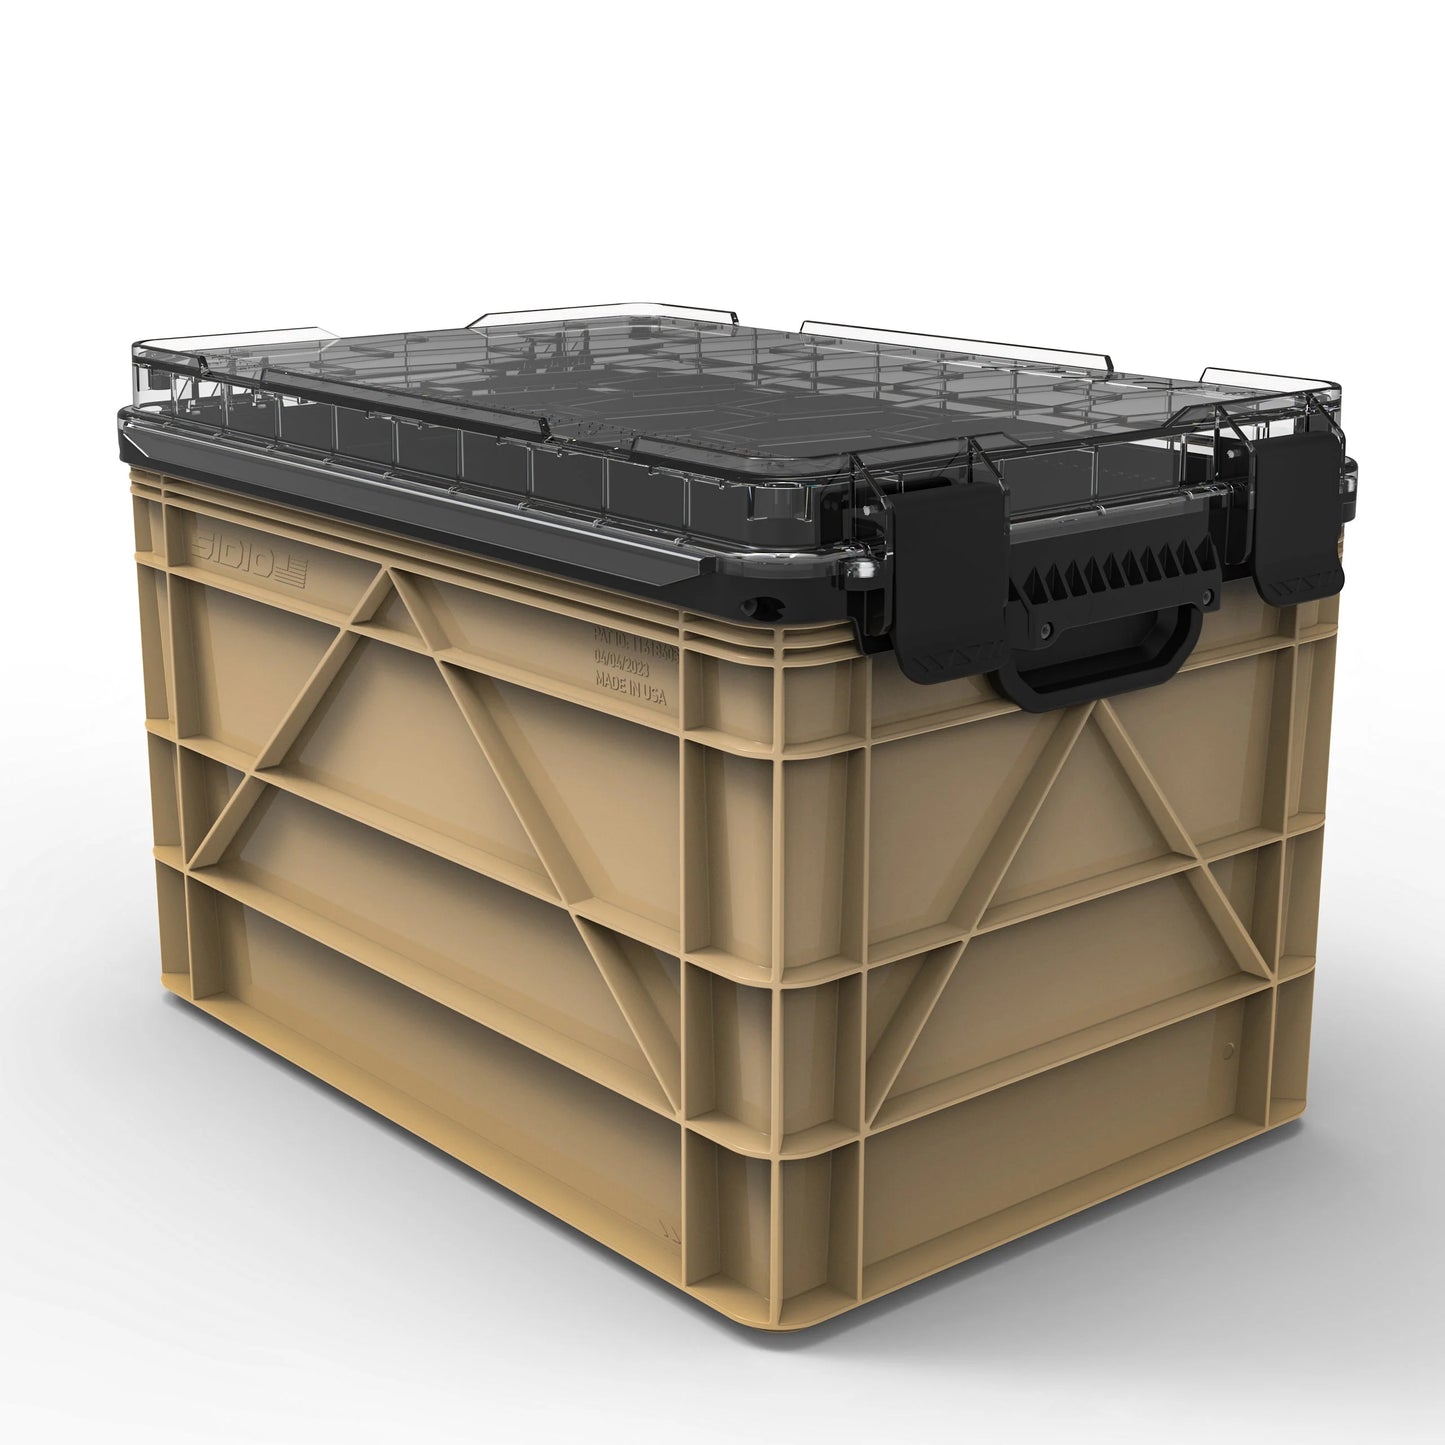 Sidio Full Size Crate - Water Resistant